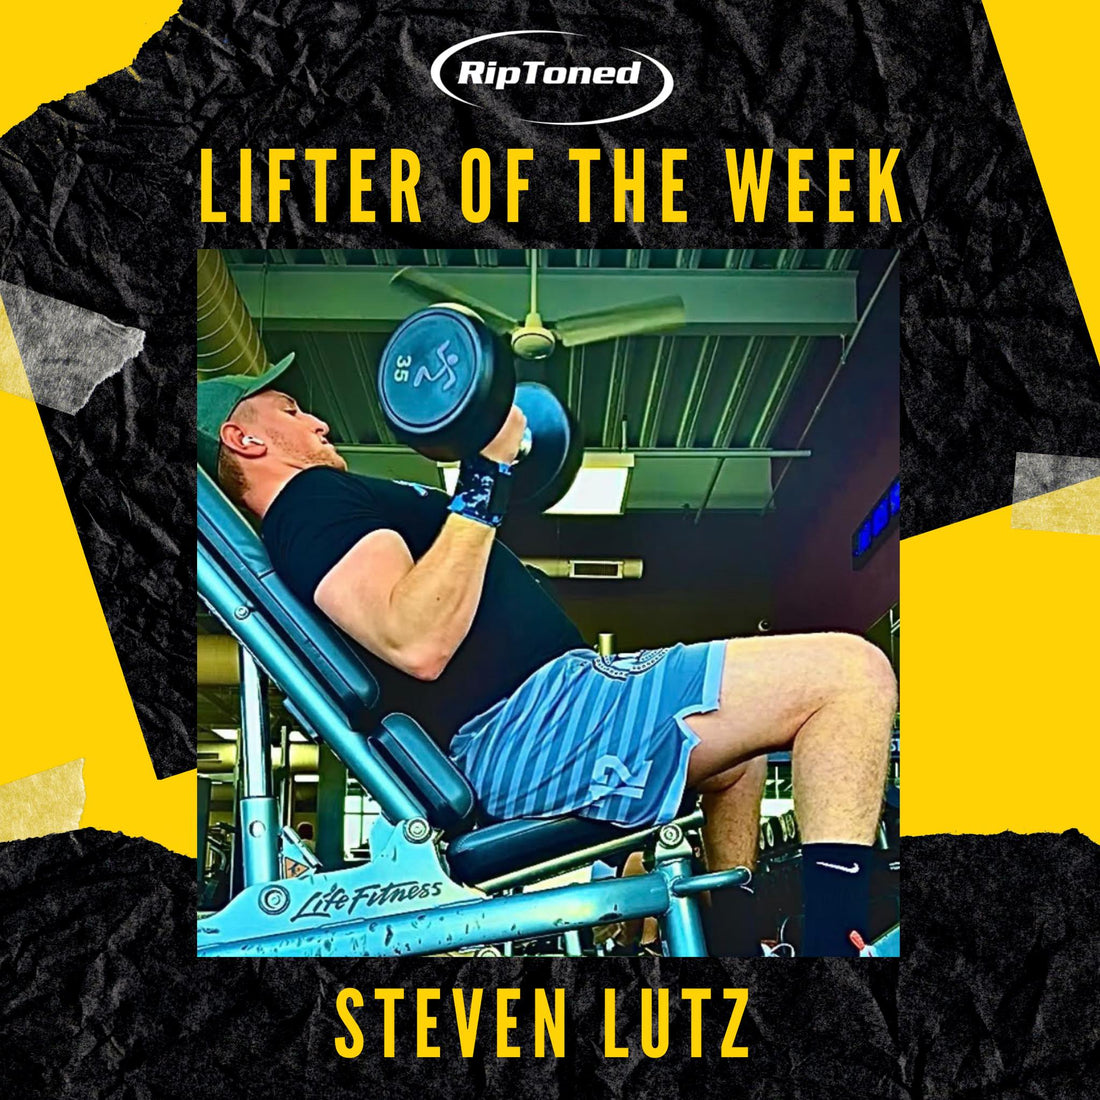 Lifter of the Week - Steven Lutz - Rip Toned